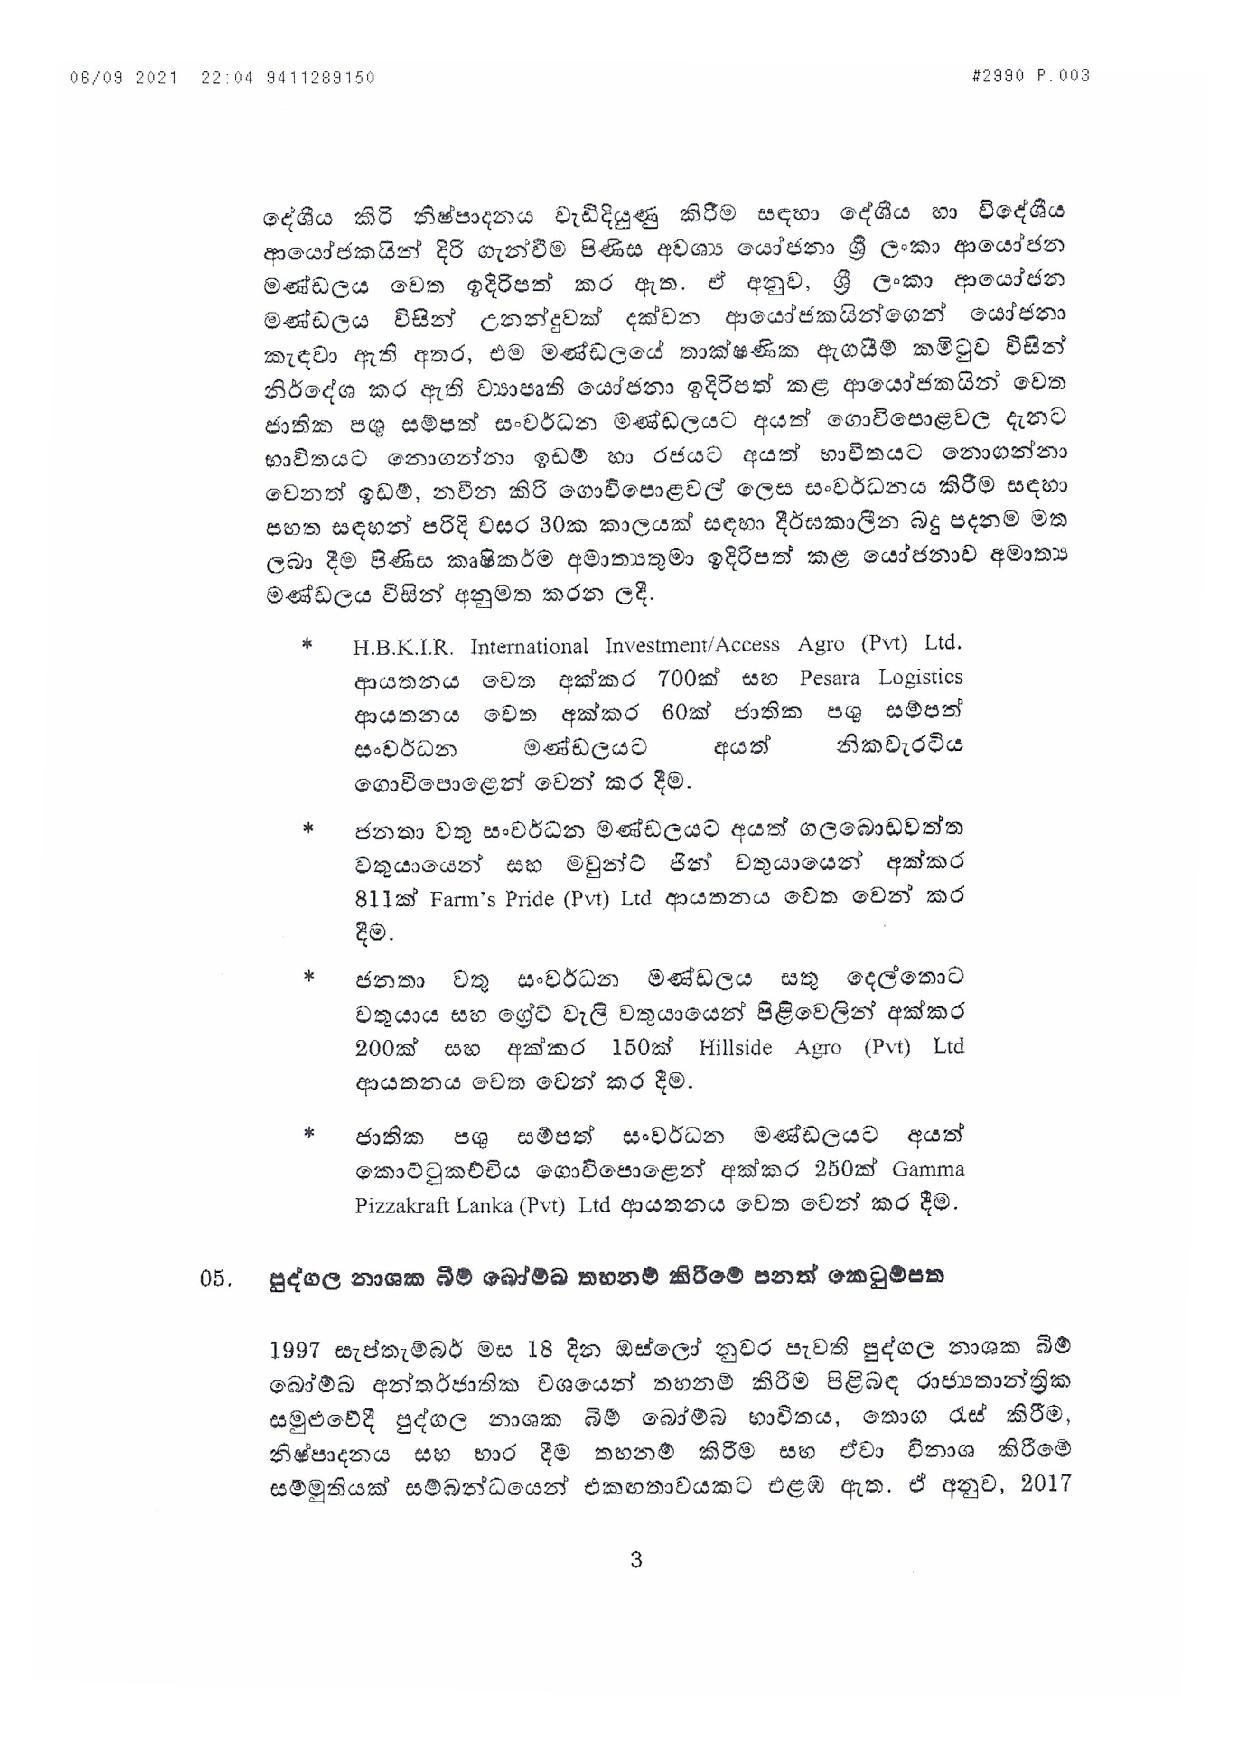 Cabinet Decision on 06.09.2021 Sinhala page 003